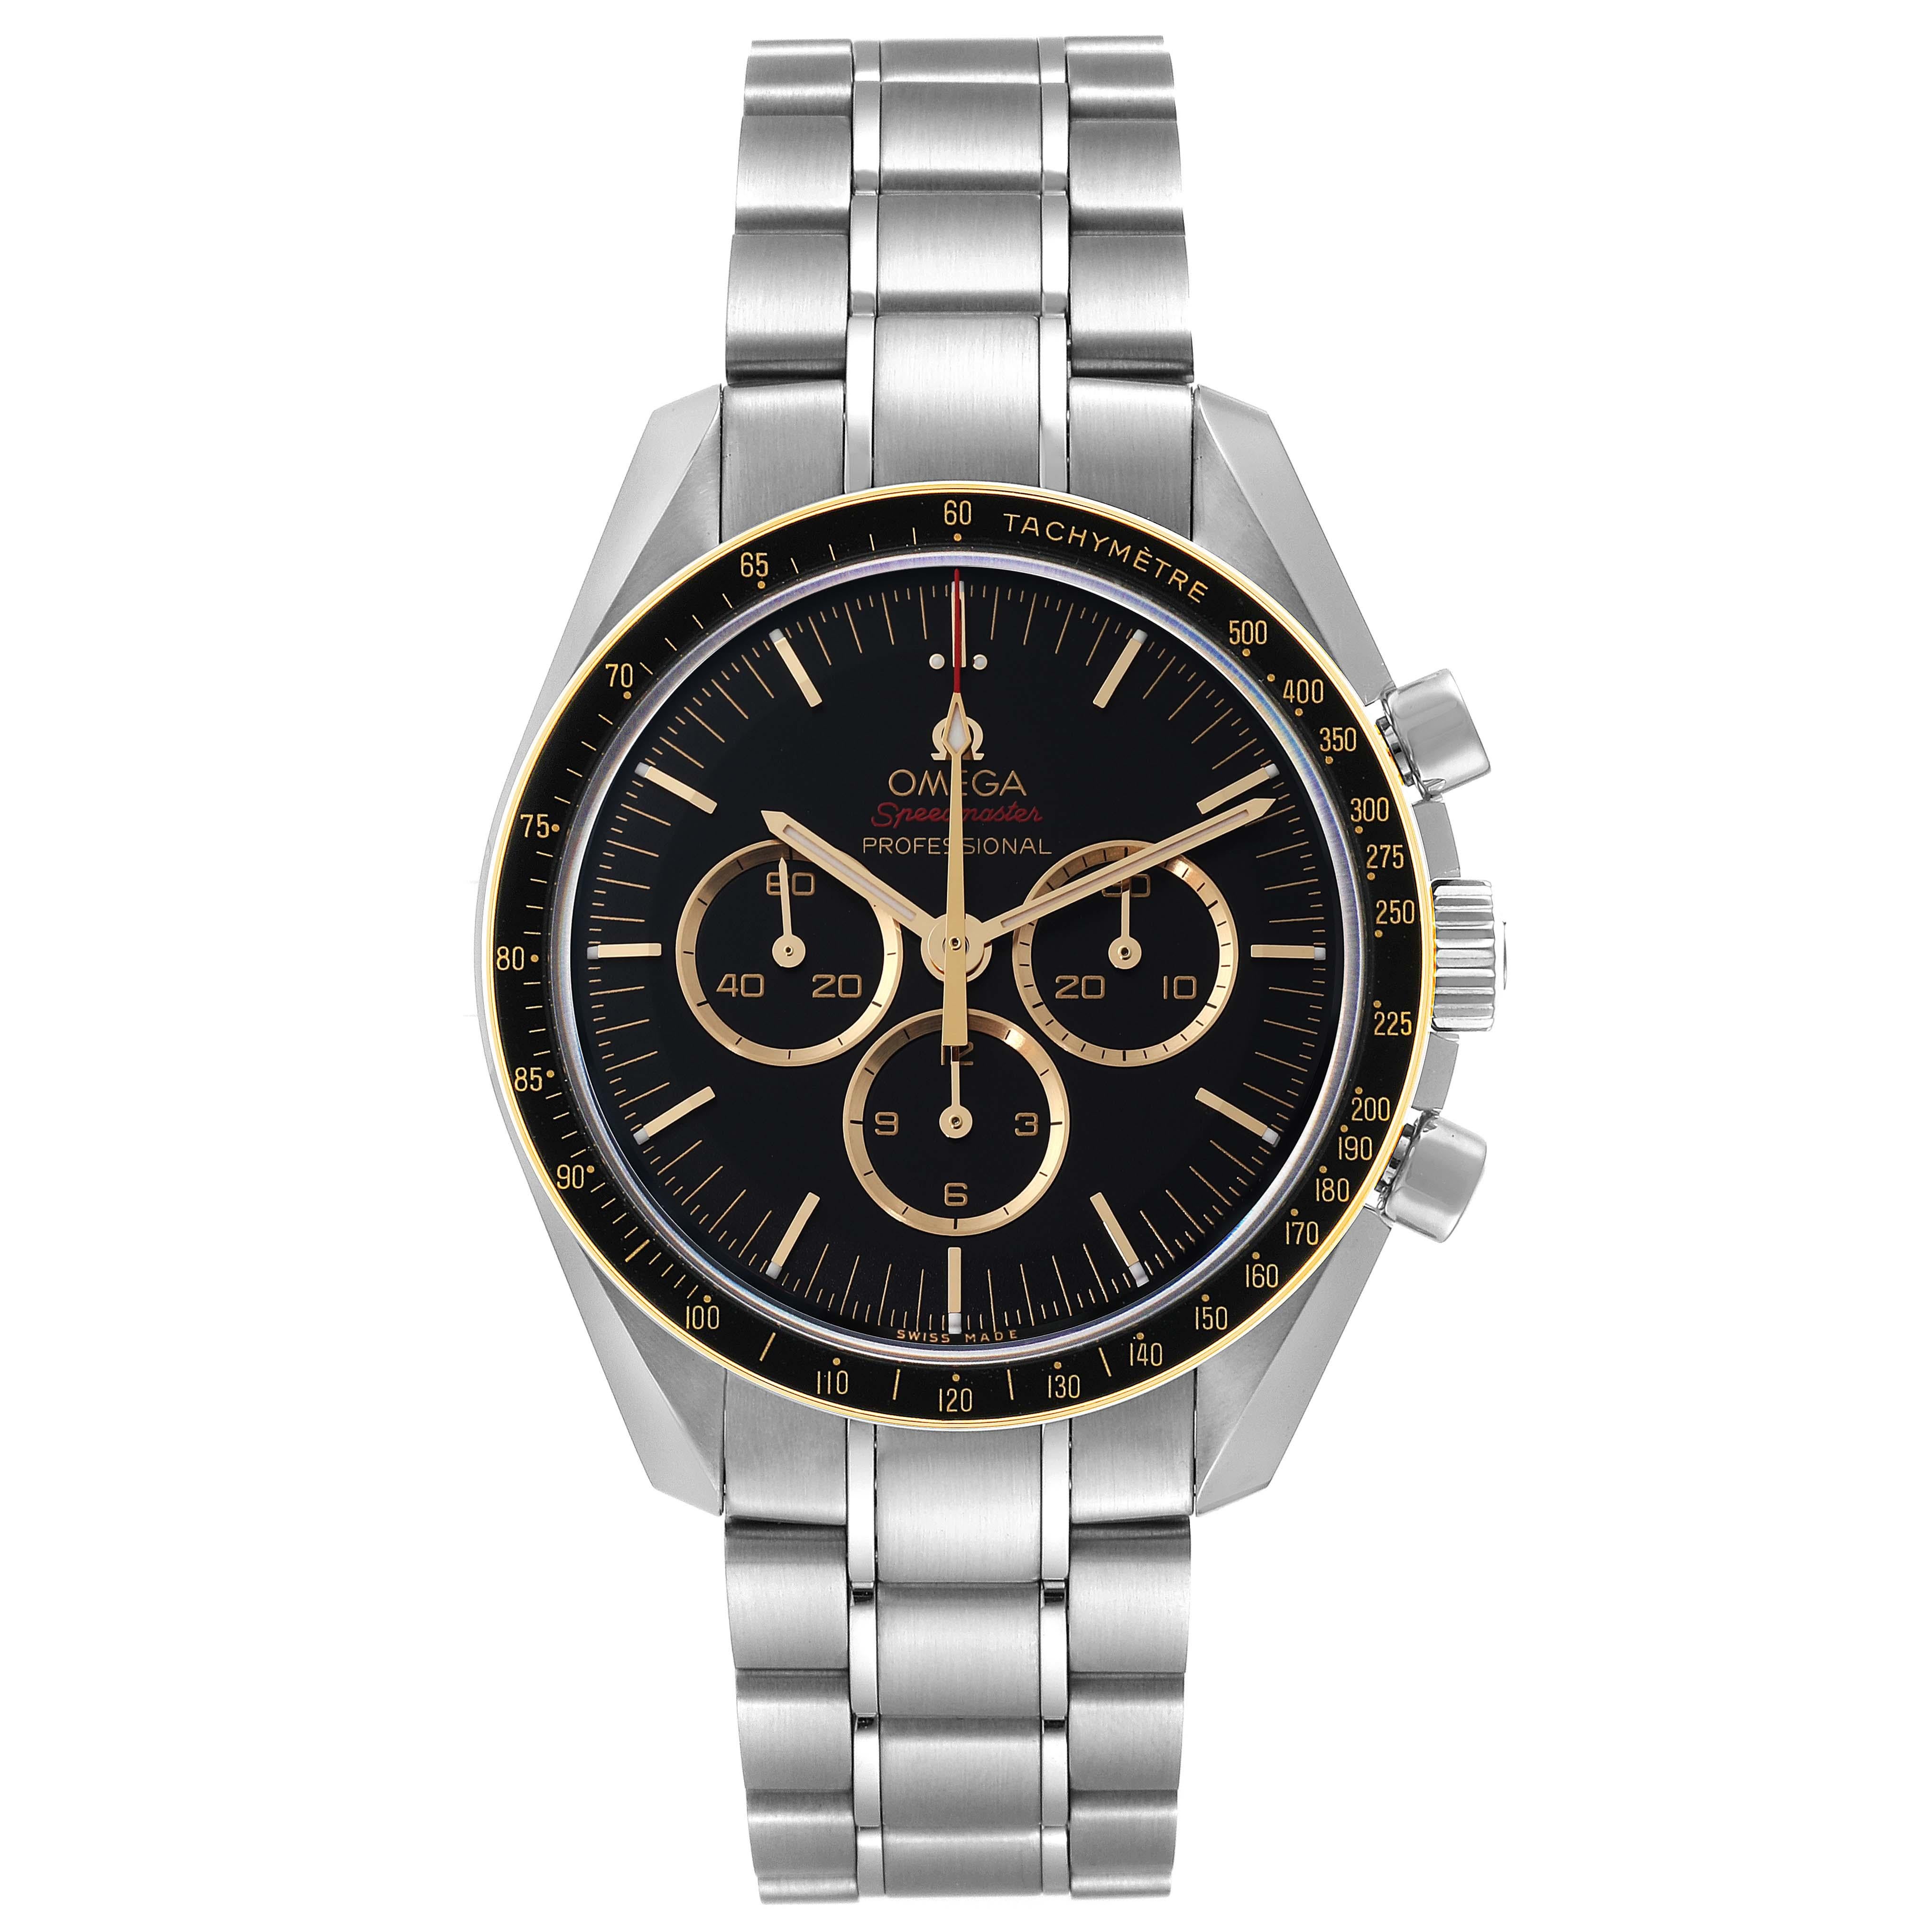 Omega Speedmaster Tokyo 2020 Olympics Limited Edition Mens Watch 522.20.42.30.01.001 Unworn. Manual winding chronograph movement. Stainless steel round case 42.0 mm in diameter. 18k yellow gold bezel with black aluminum tachymeter insert. Scratch